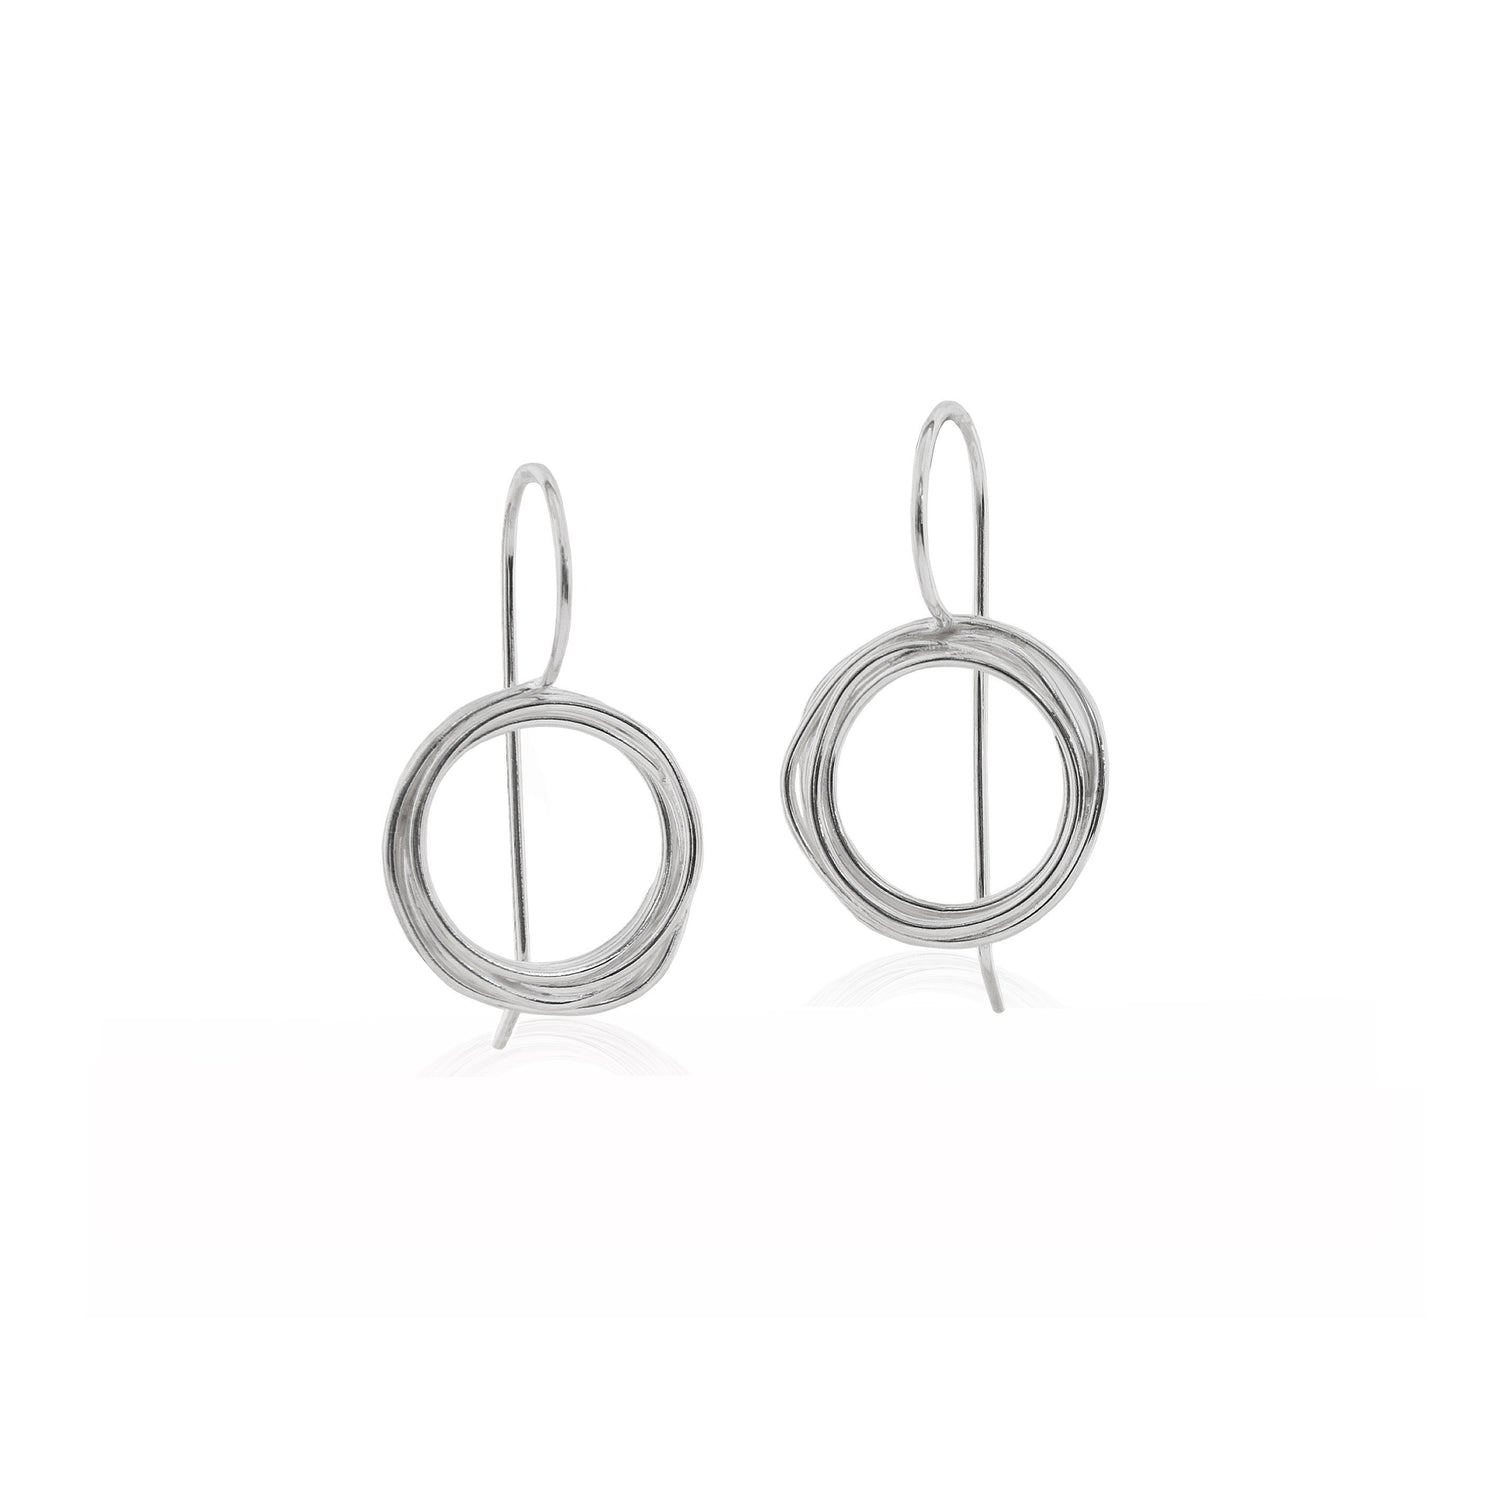 Small Circular Coiled wire Hook Earrings in Sterling Silver handmade in Adelaide, South Australia by Melissa Gillespie Jewellery